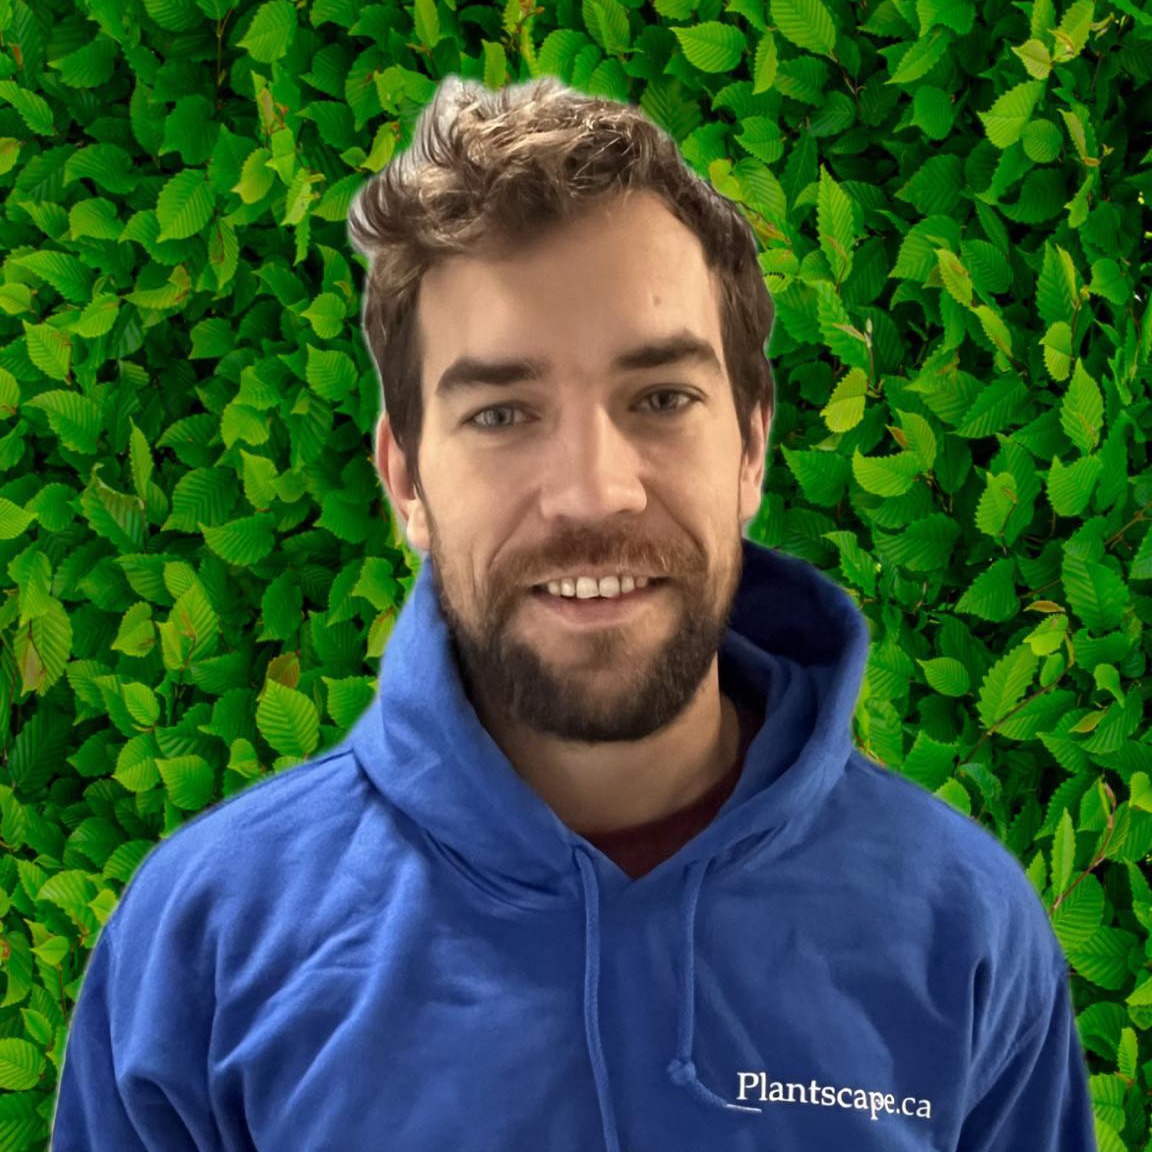 A person with a beard is smiling in front of a green leafy background, wearing a blue hoodie with the text "Plantscape.ca" printed on it.